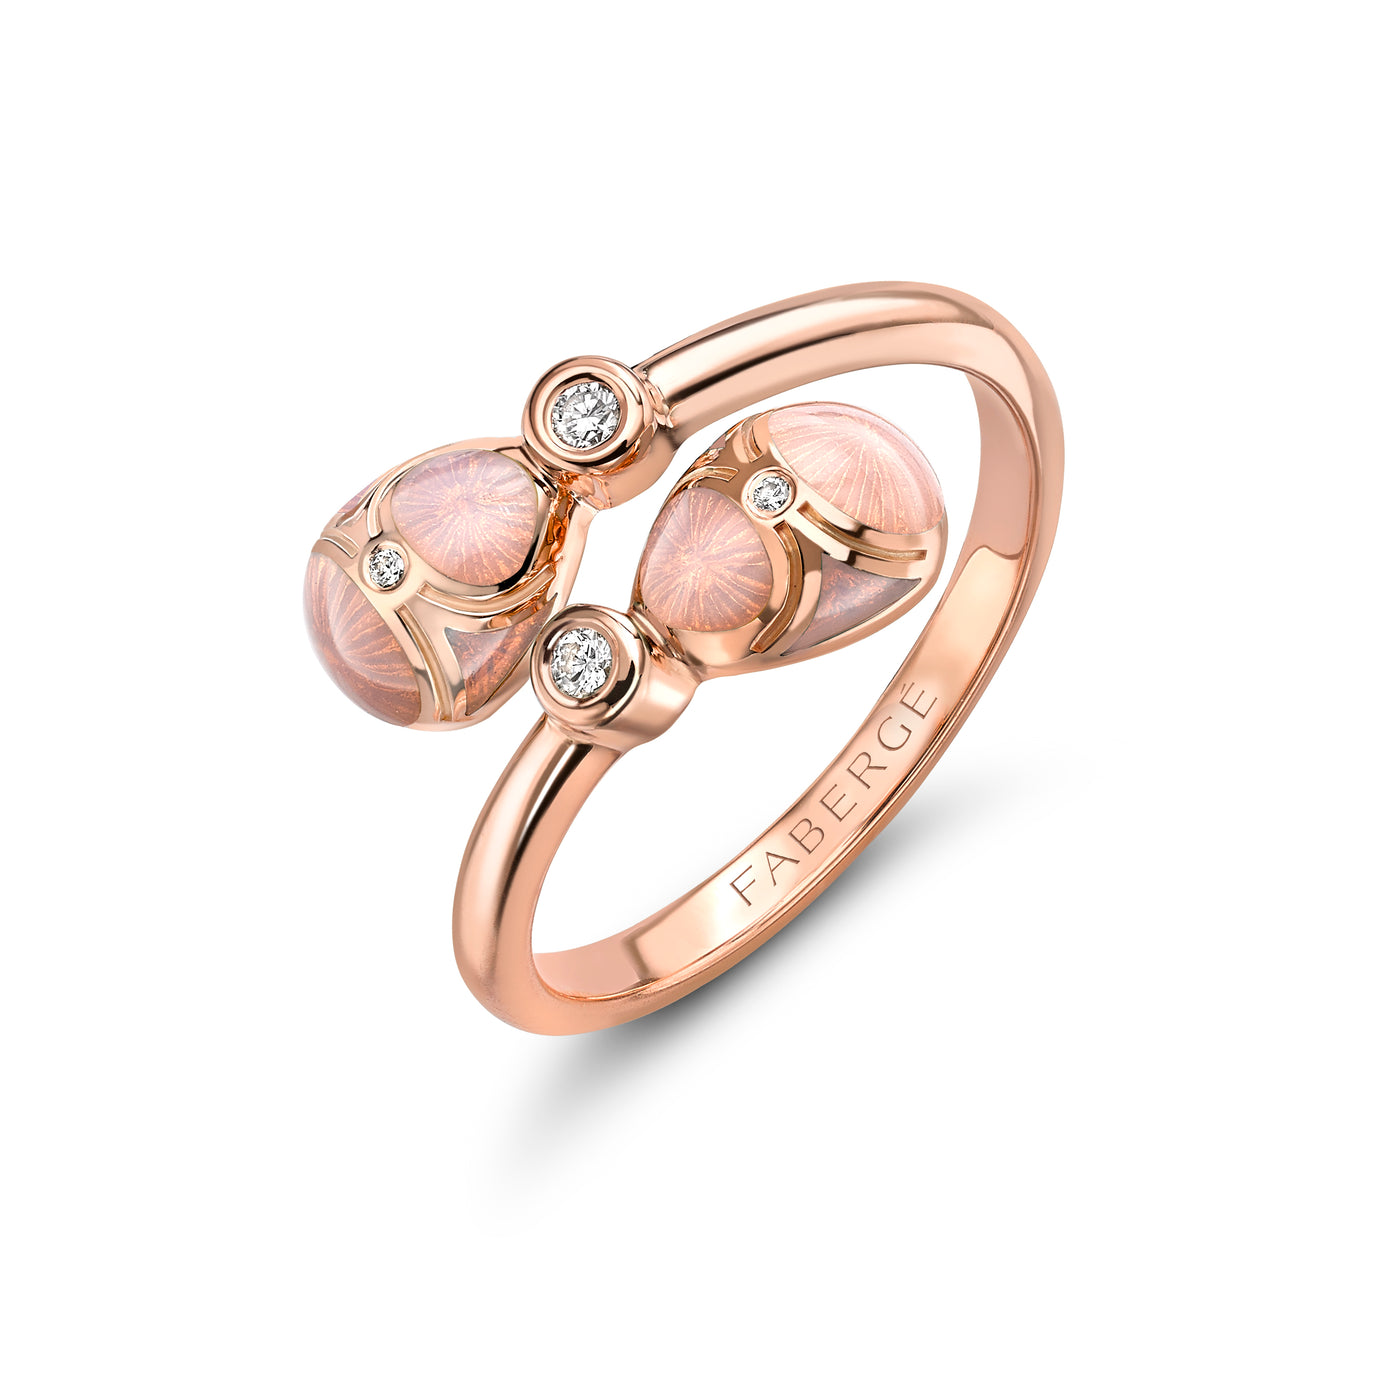 Fabergé Heritage Rose Gold Pink Guilloché Enamel Crossover Ring